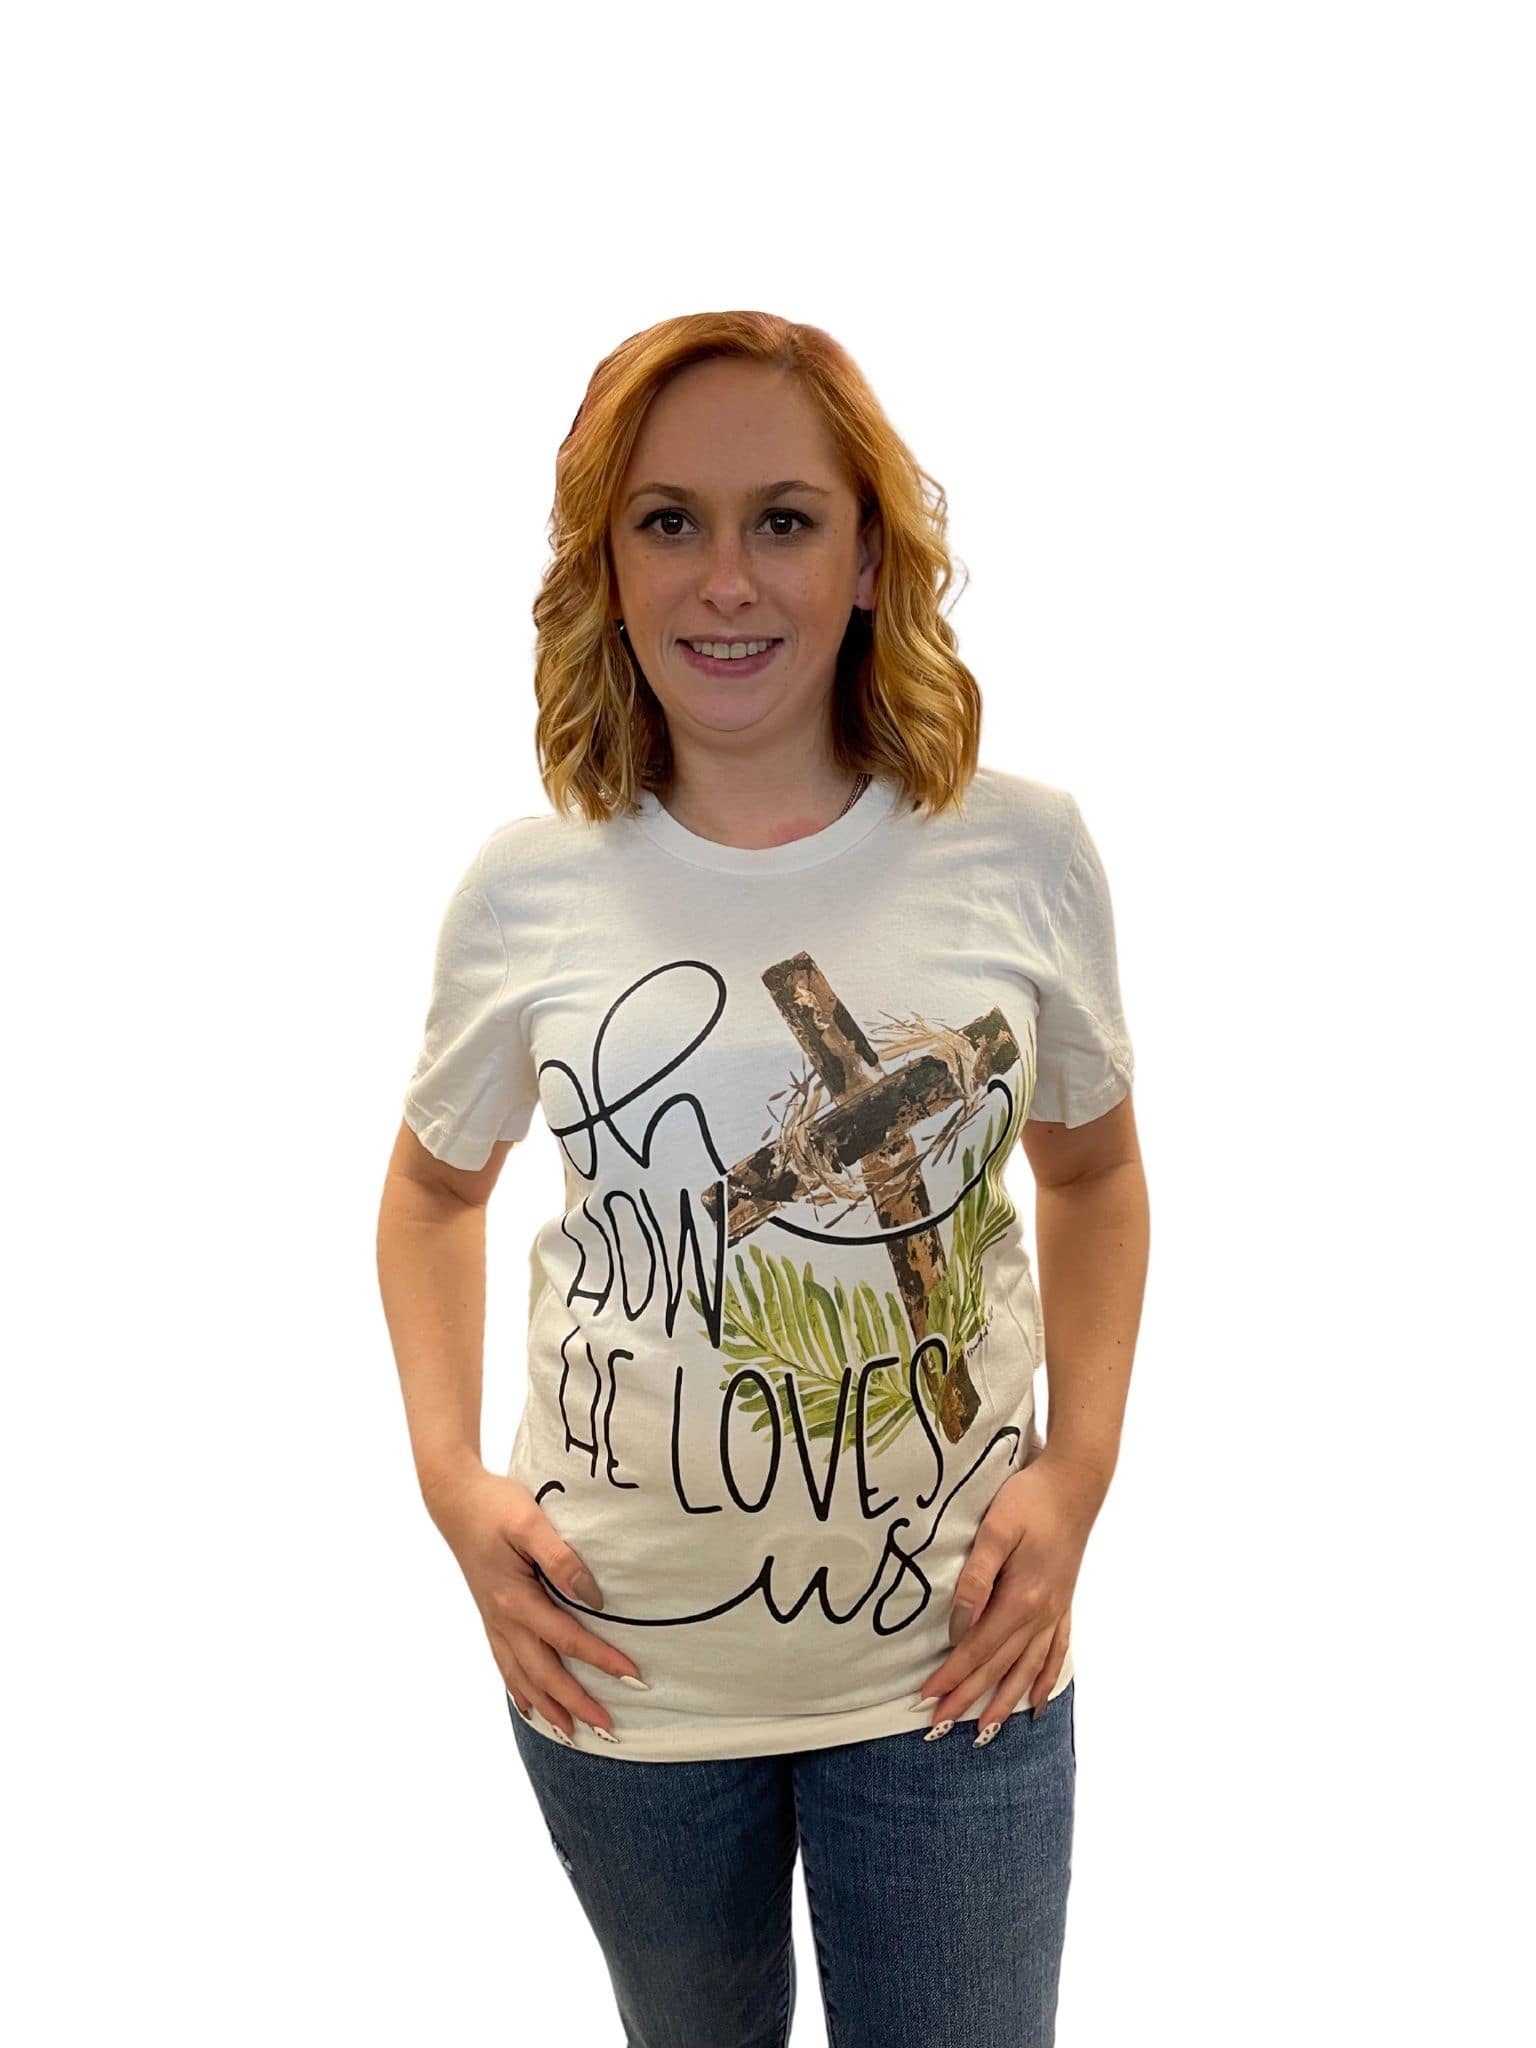 Oh How He Loves Us TShirt